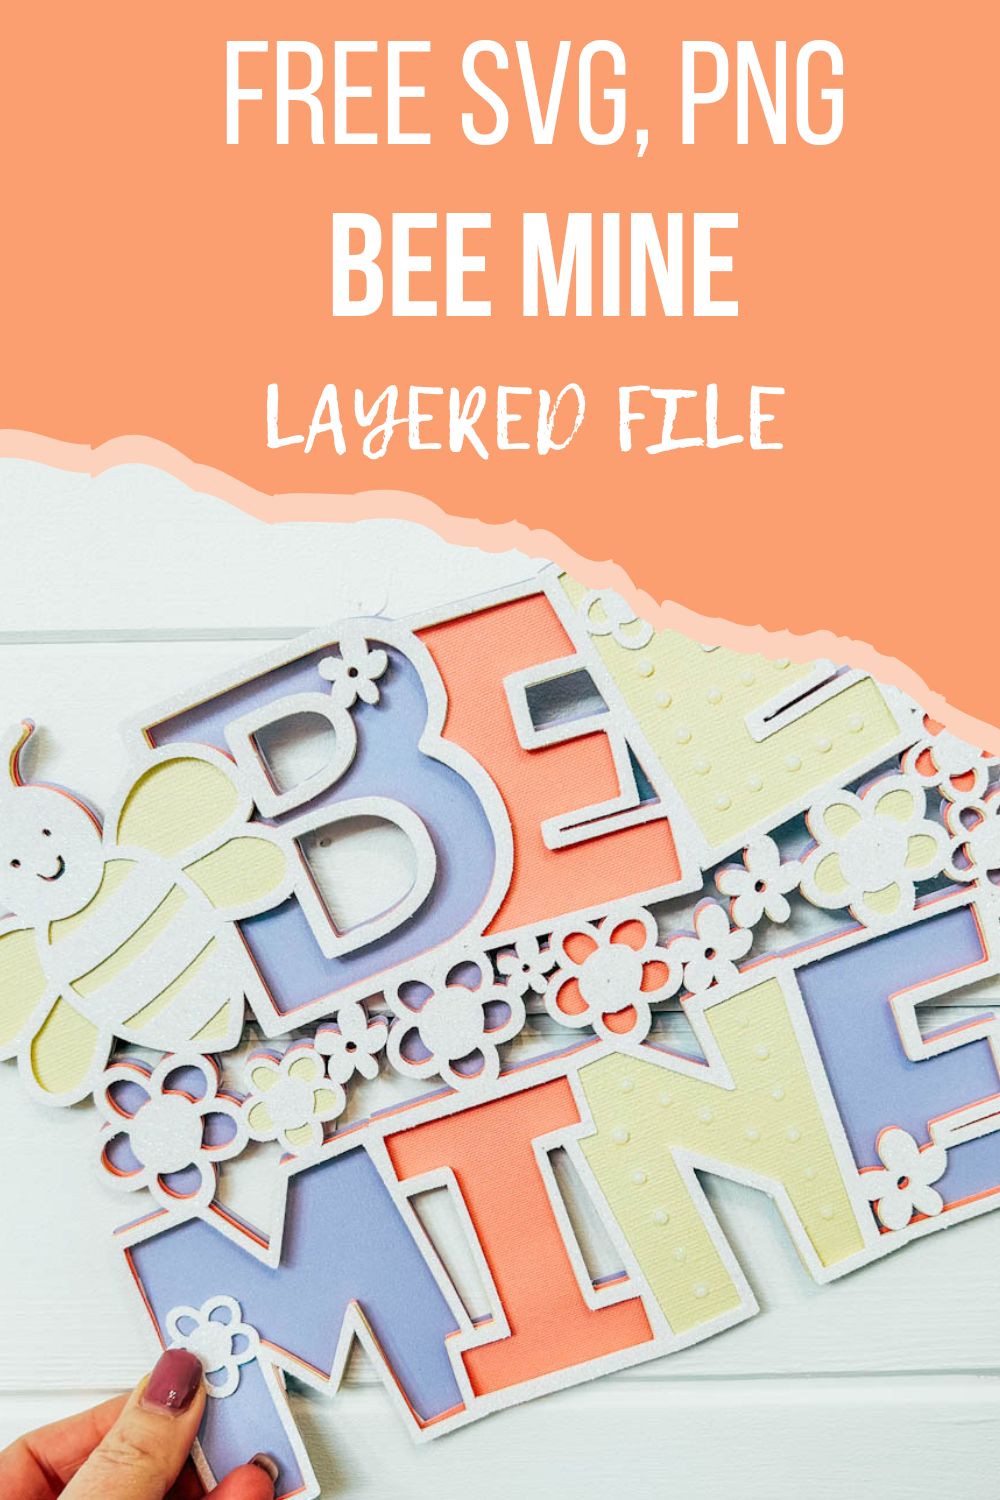 Free SVG, PNG Bee Mine layered File